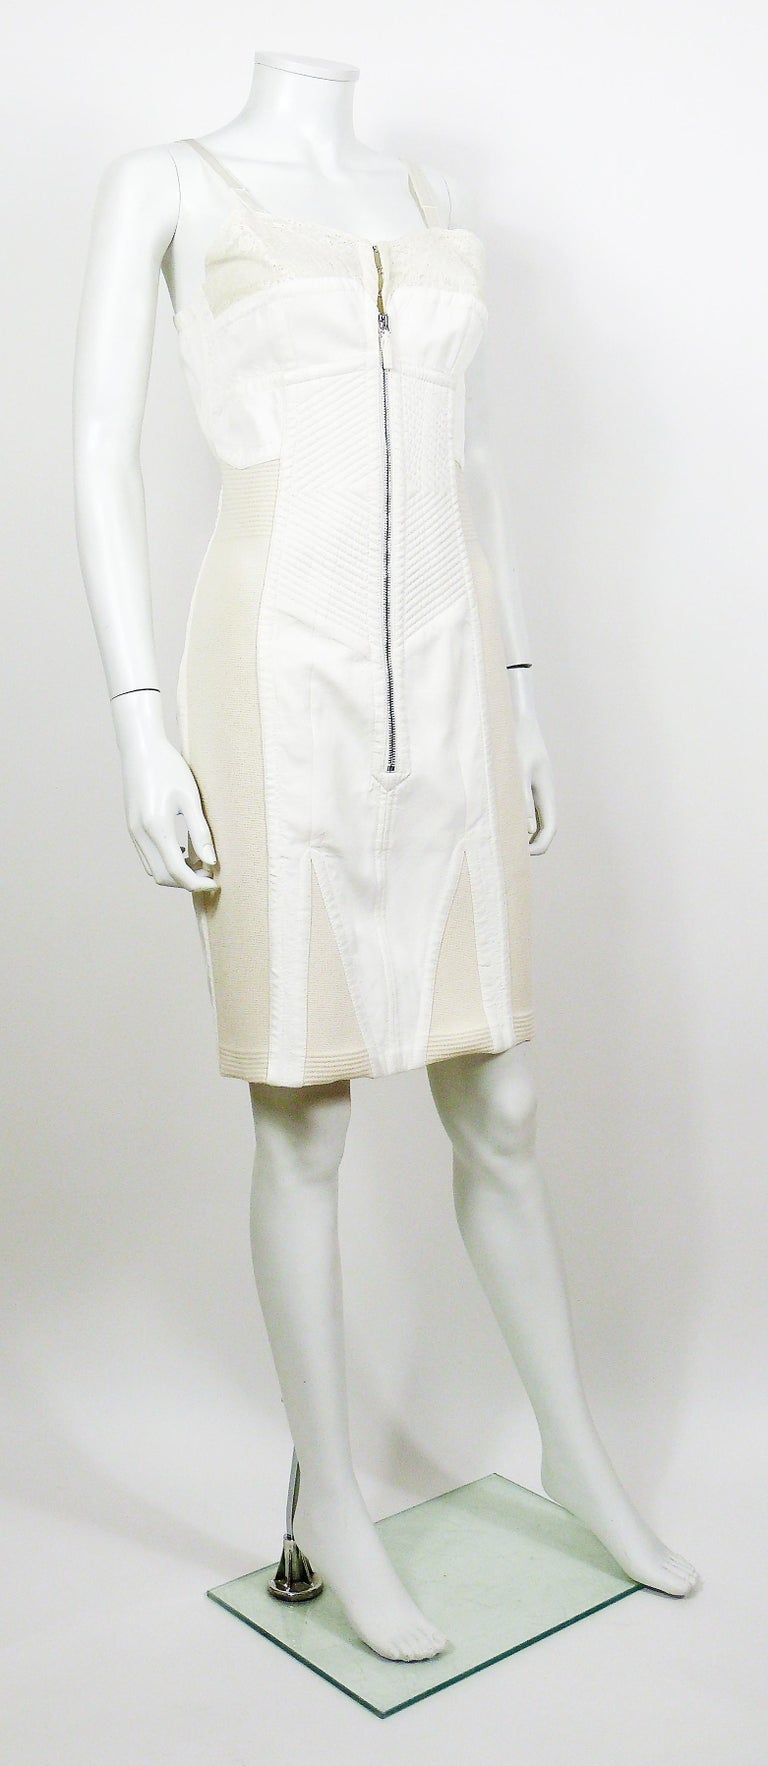 JEAN PAUL GAULTIER  rare off-white paneled corset like featuring lace bra and lingerie style straps.

This dress is made of stretch knit panels to fit to the body shape.

Label reads JEAN PAUL GAULTIER FEMME.
Made in Hungary.

Size tag reads : I 46